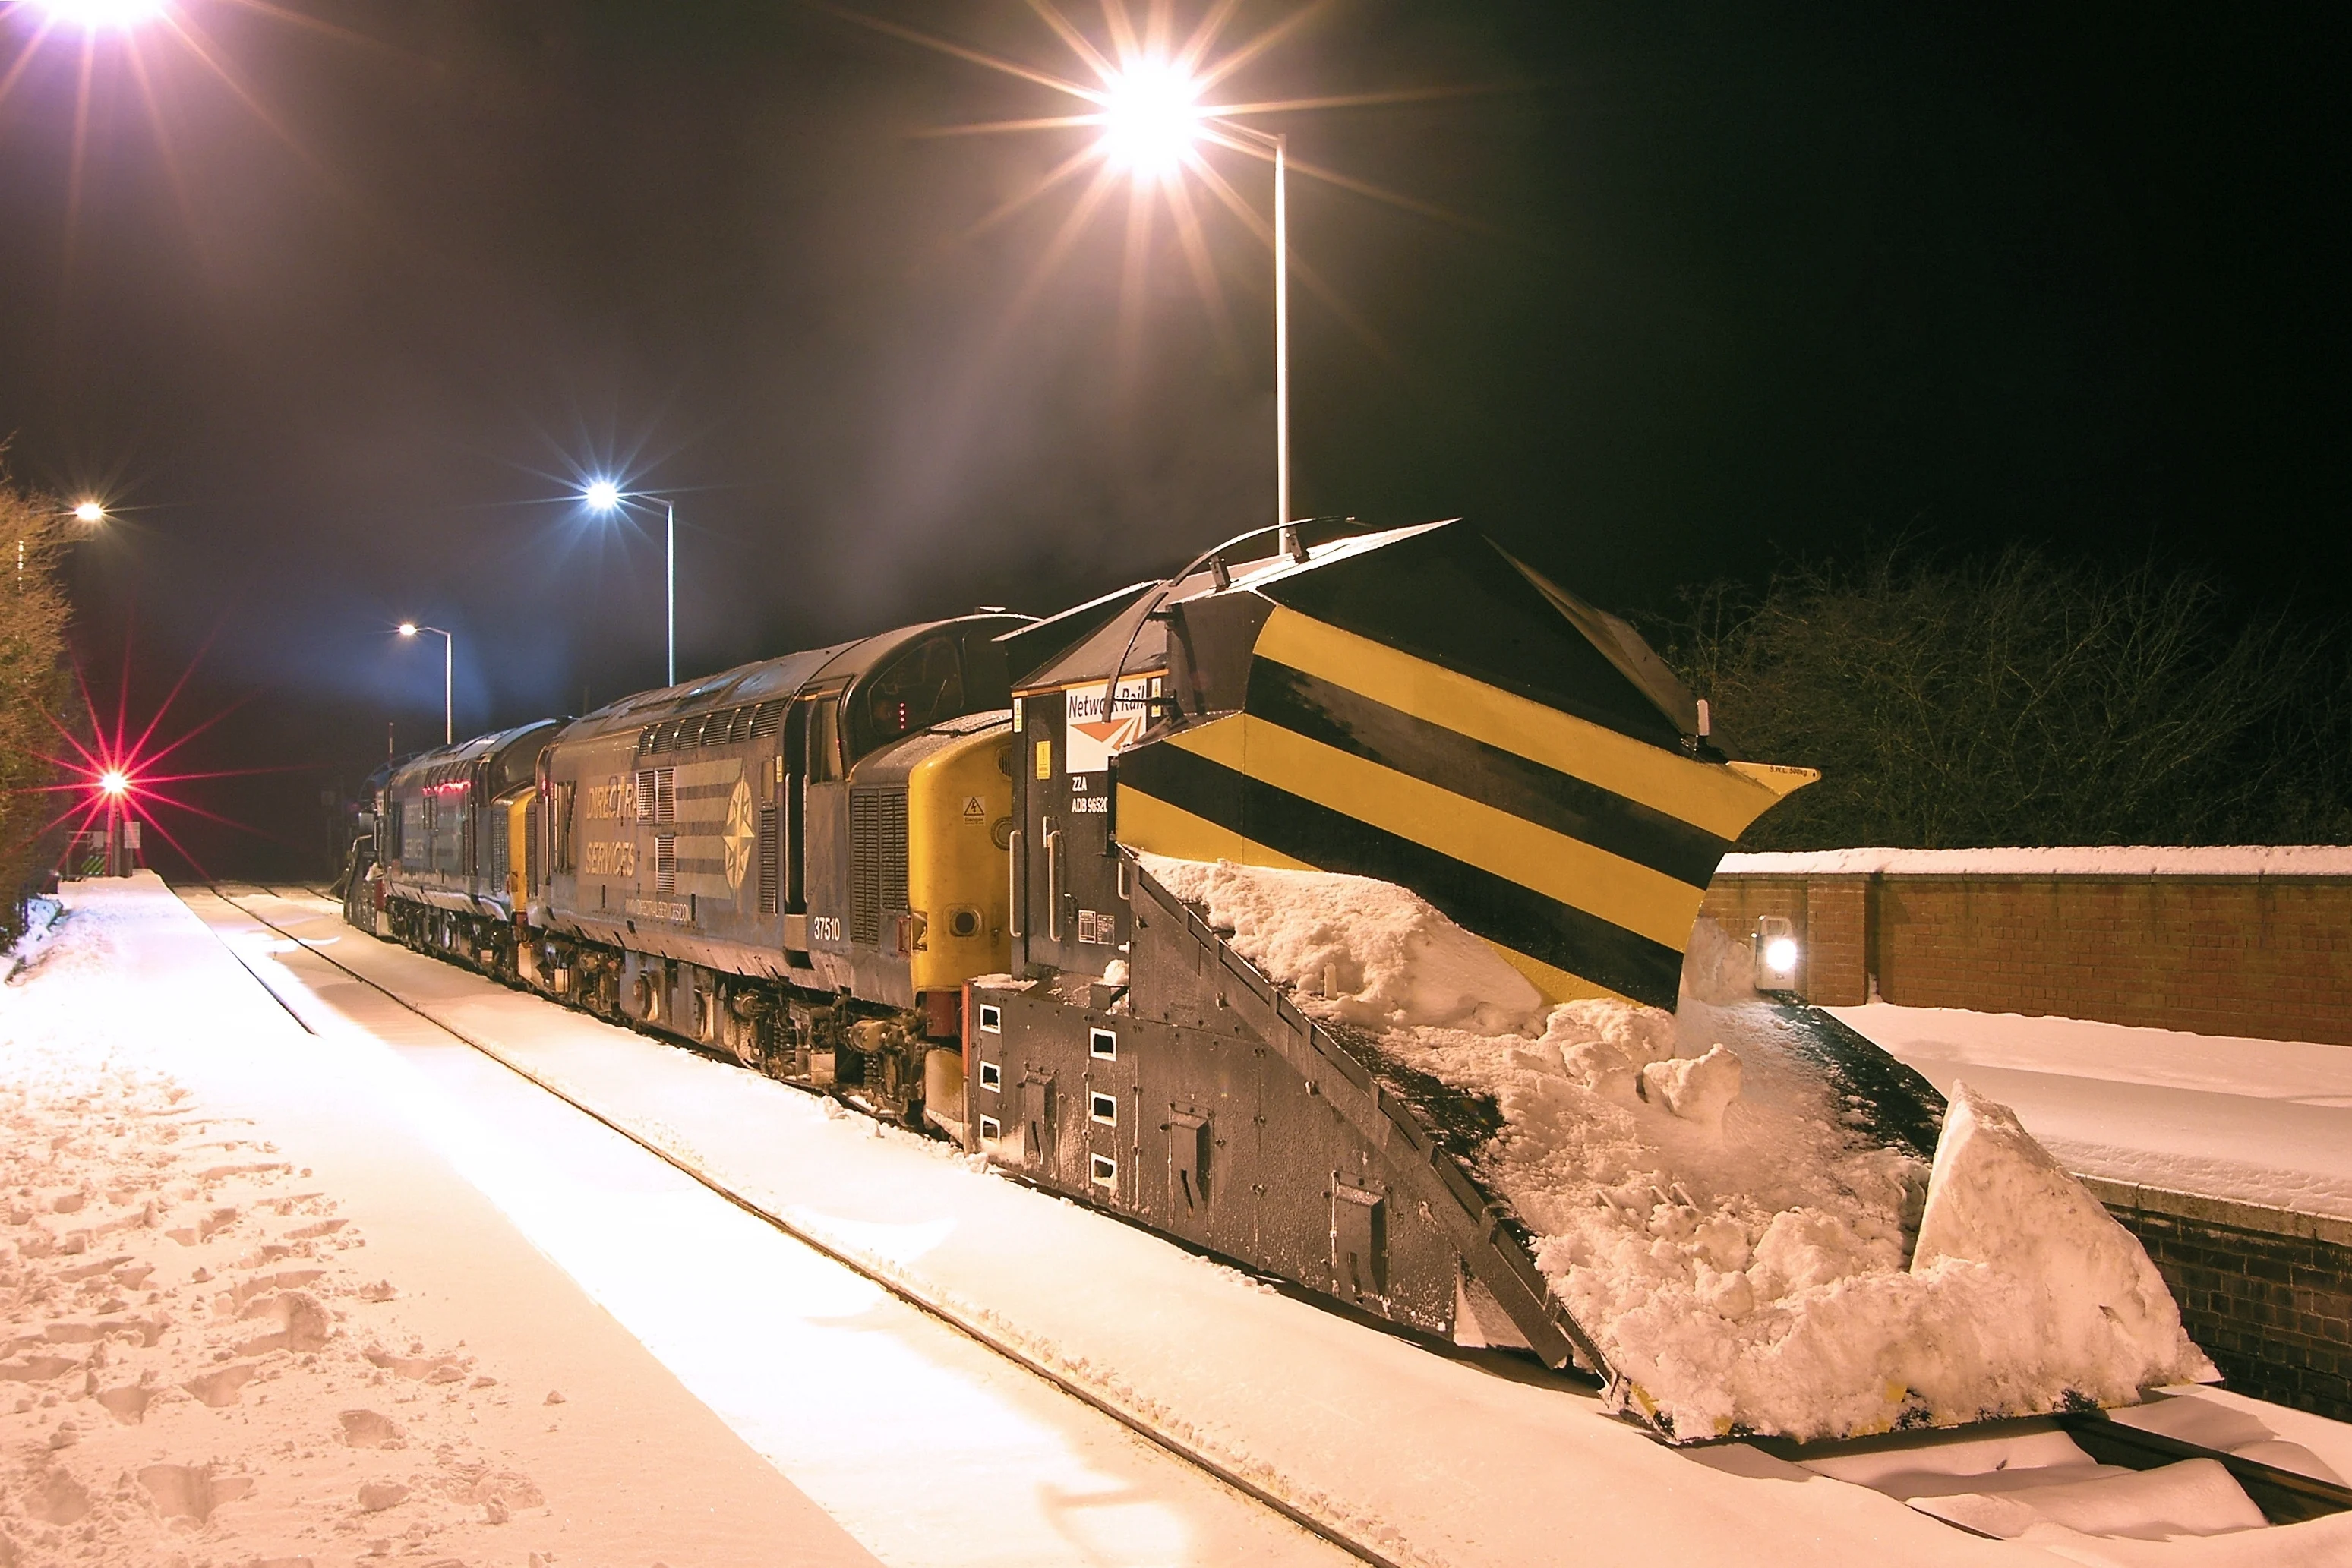 A snowplough clearing a railway track at night.